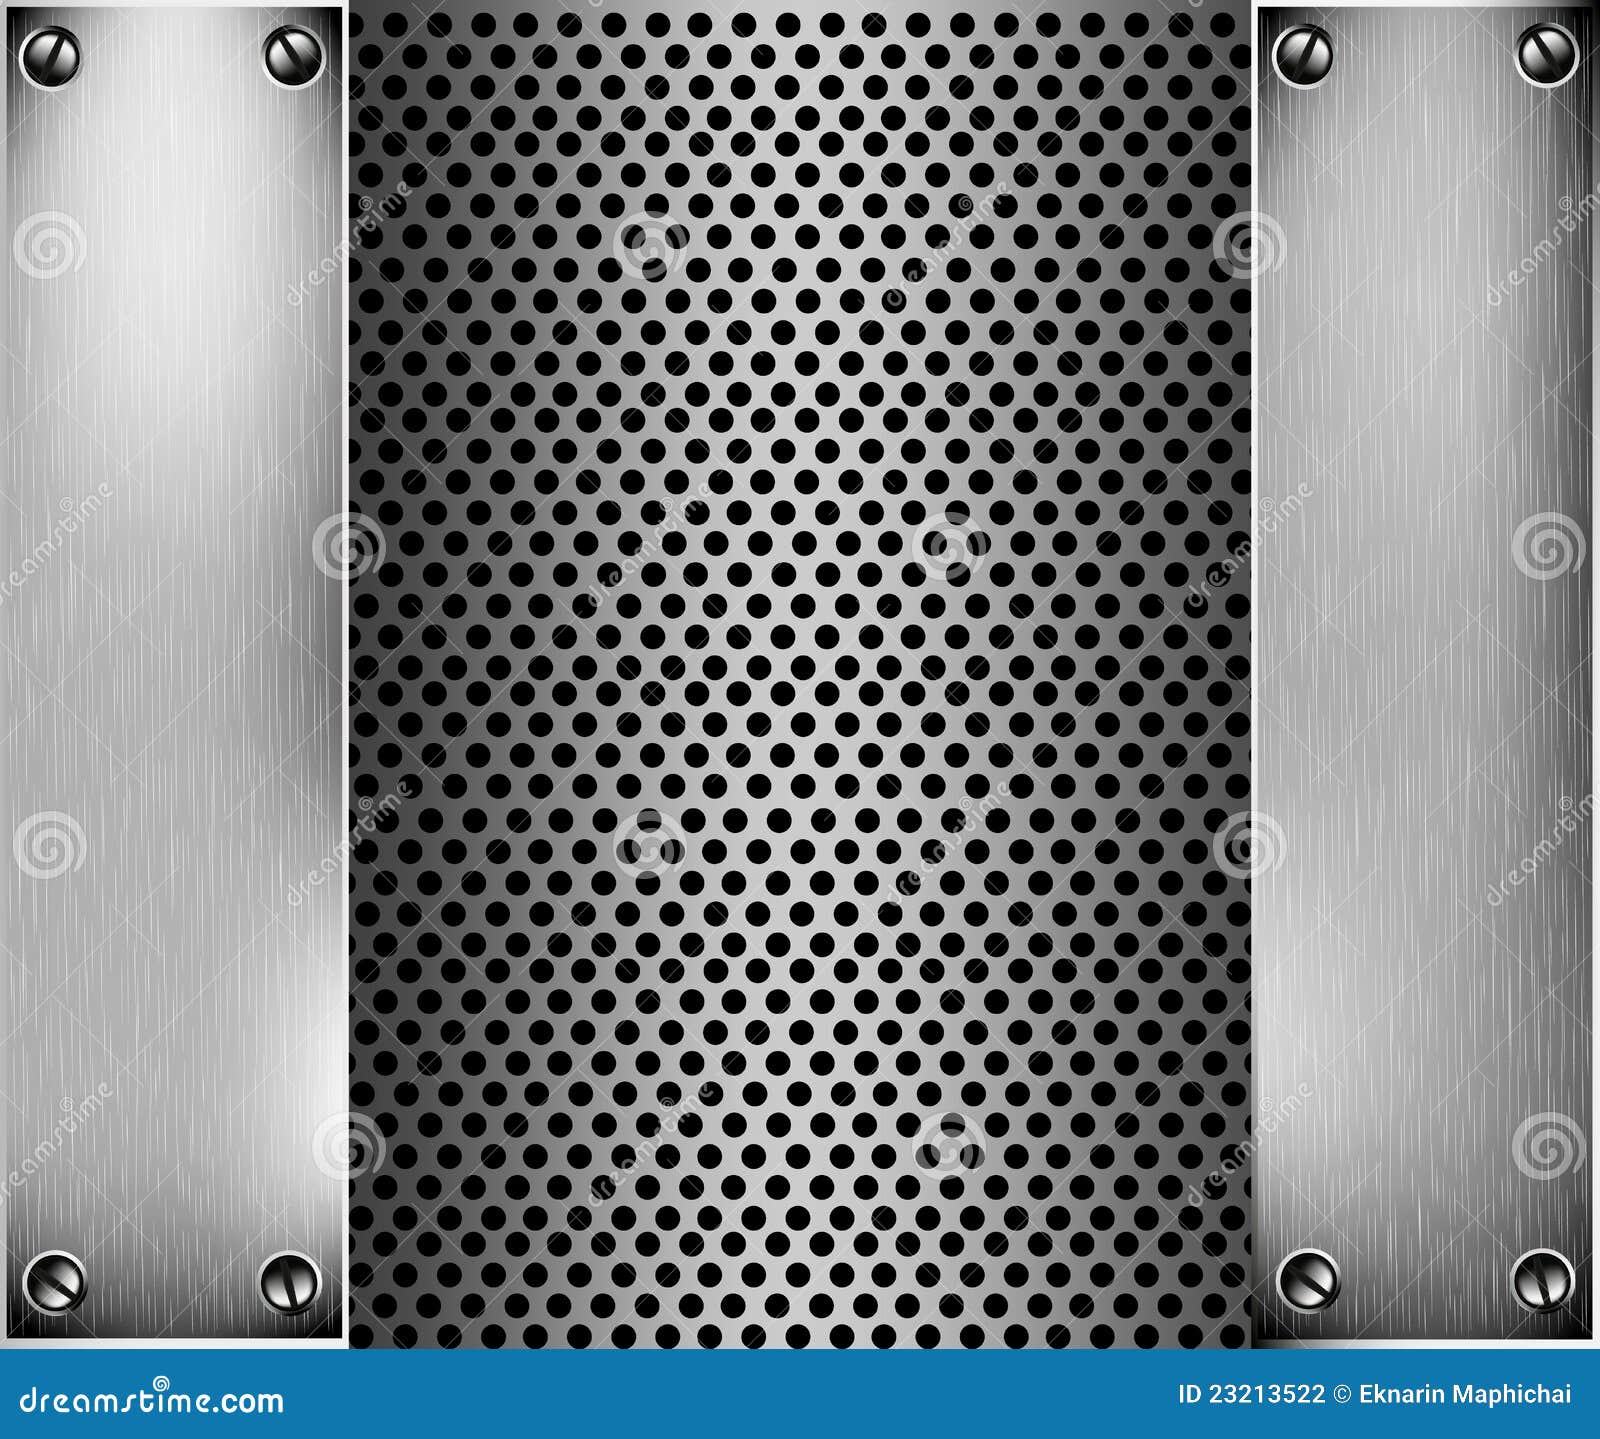 Stainless steel background stock illustration. Illustration of abstract